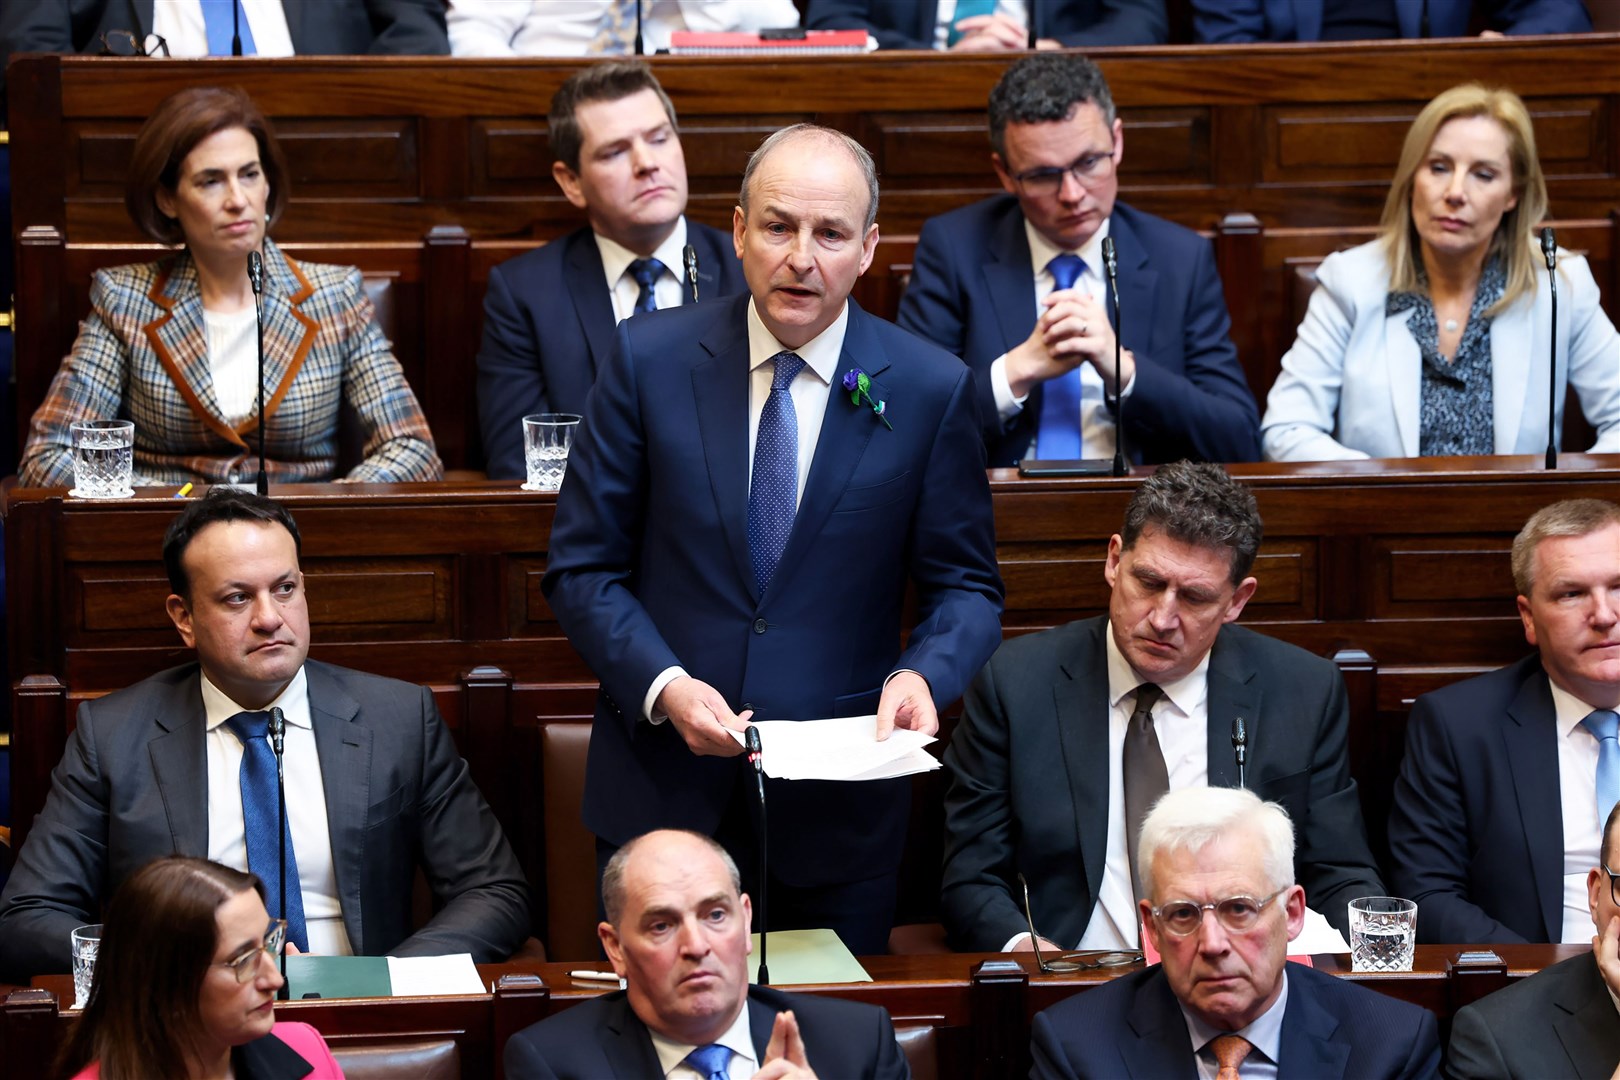 Fianna Fail leader and deputy premier Micheal Martin spoke in support of Mr Harris’s nomination (Maxwell Photography/PA)